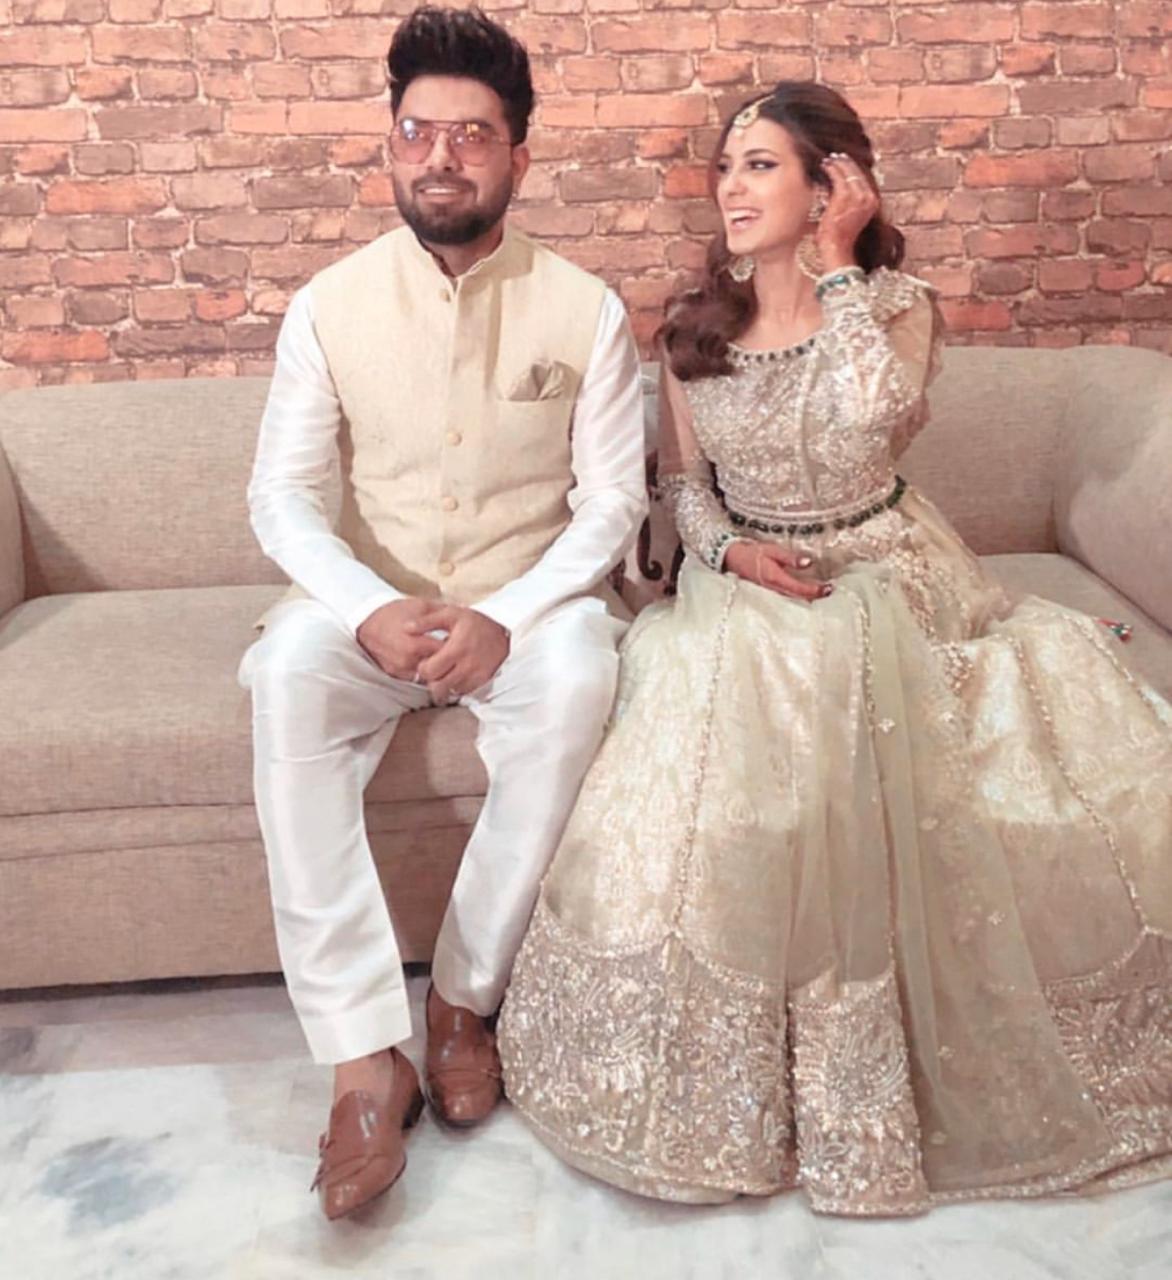 The Current on LinkedIn: #sabooraly #iqraaziz #wedding #dress #controversy  #thecurrent